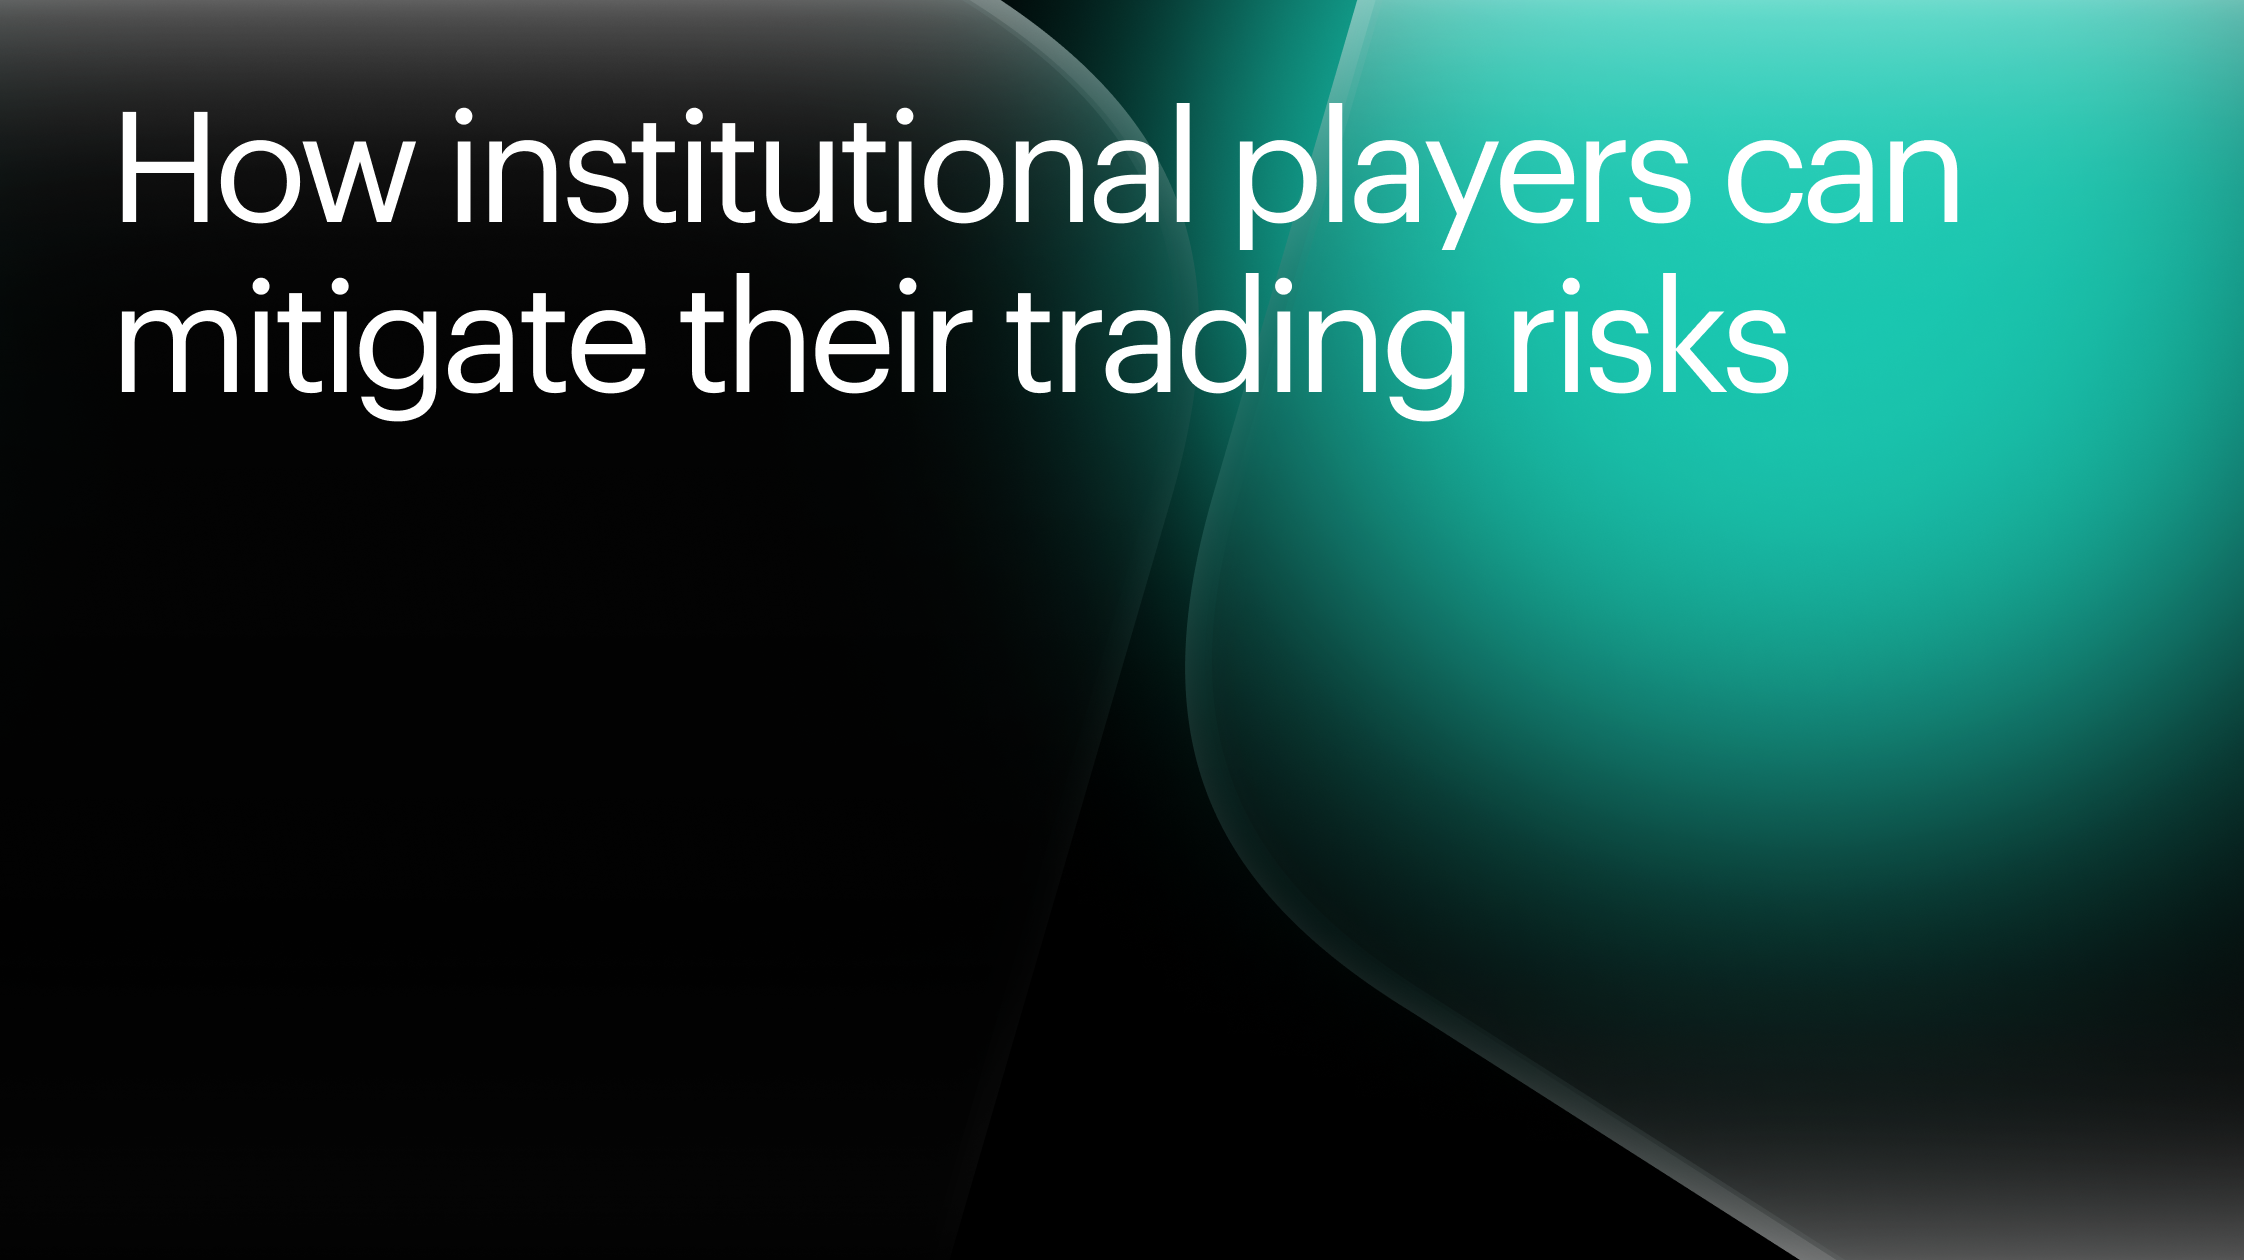 How institutional players can mitigate their trading risks